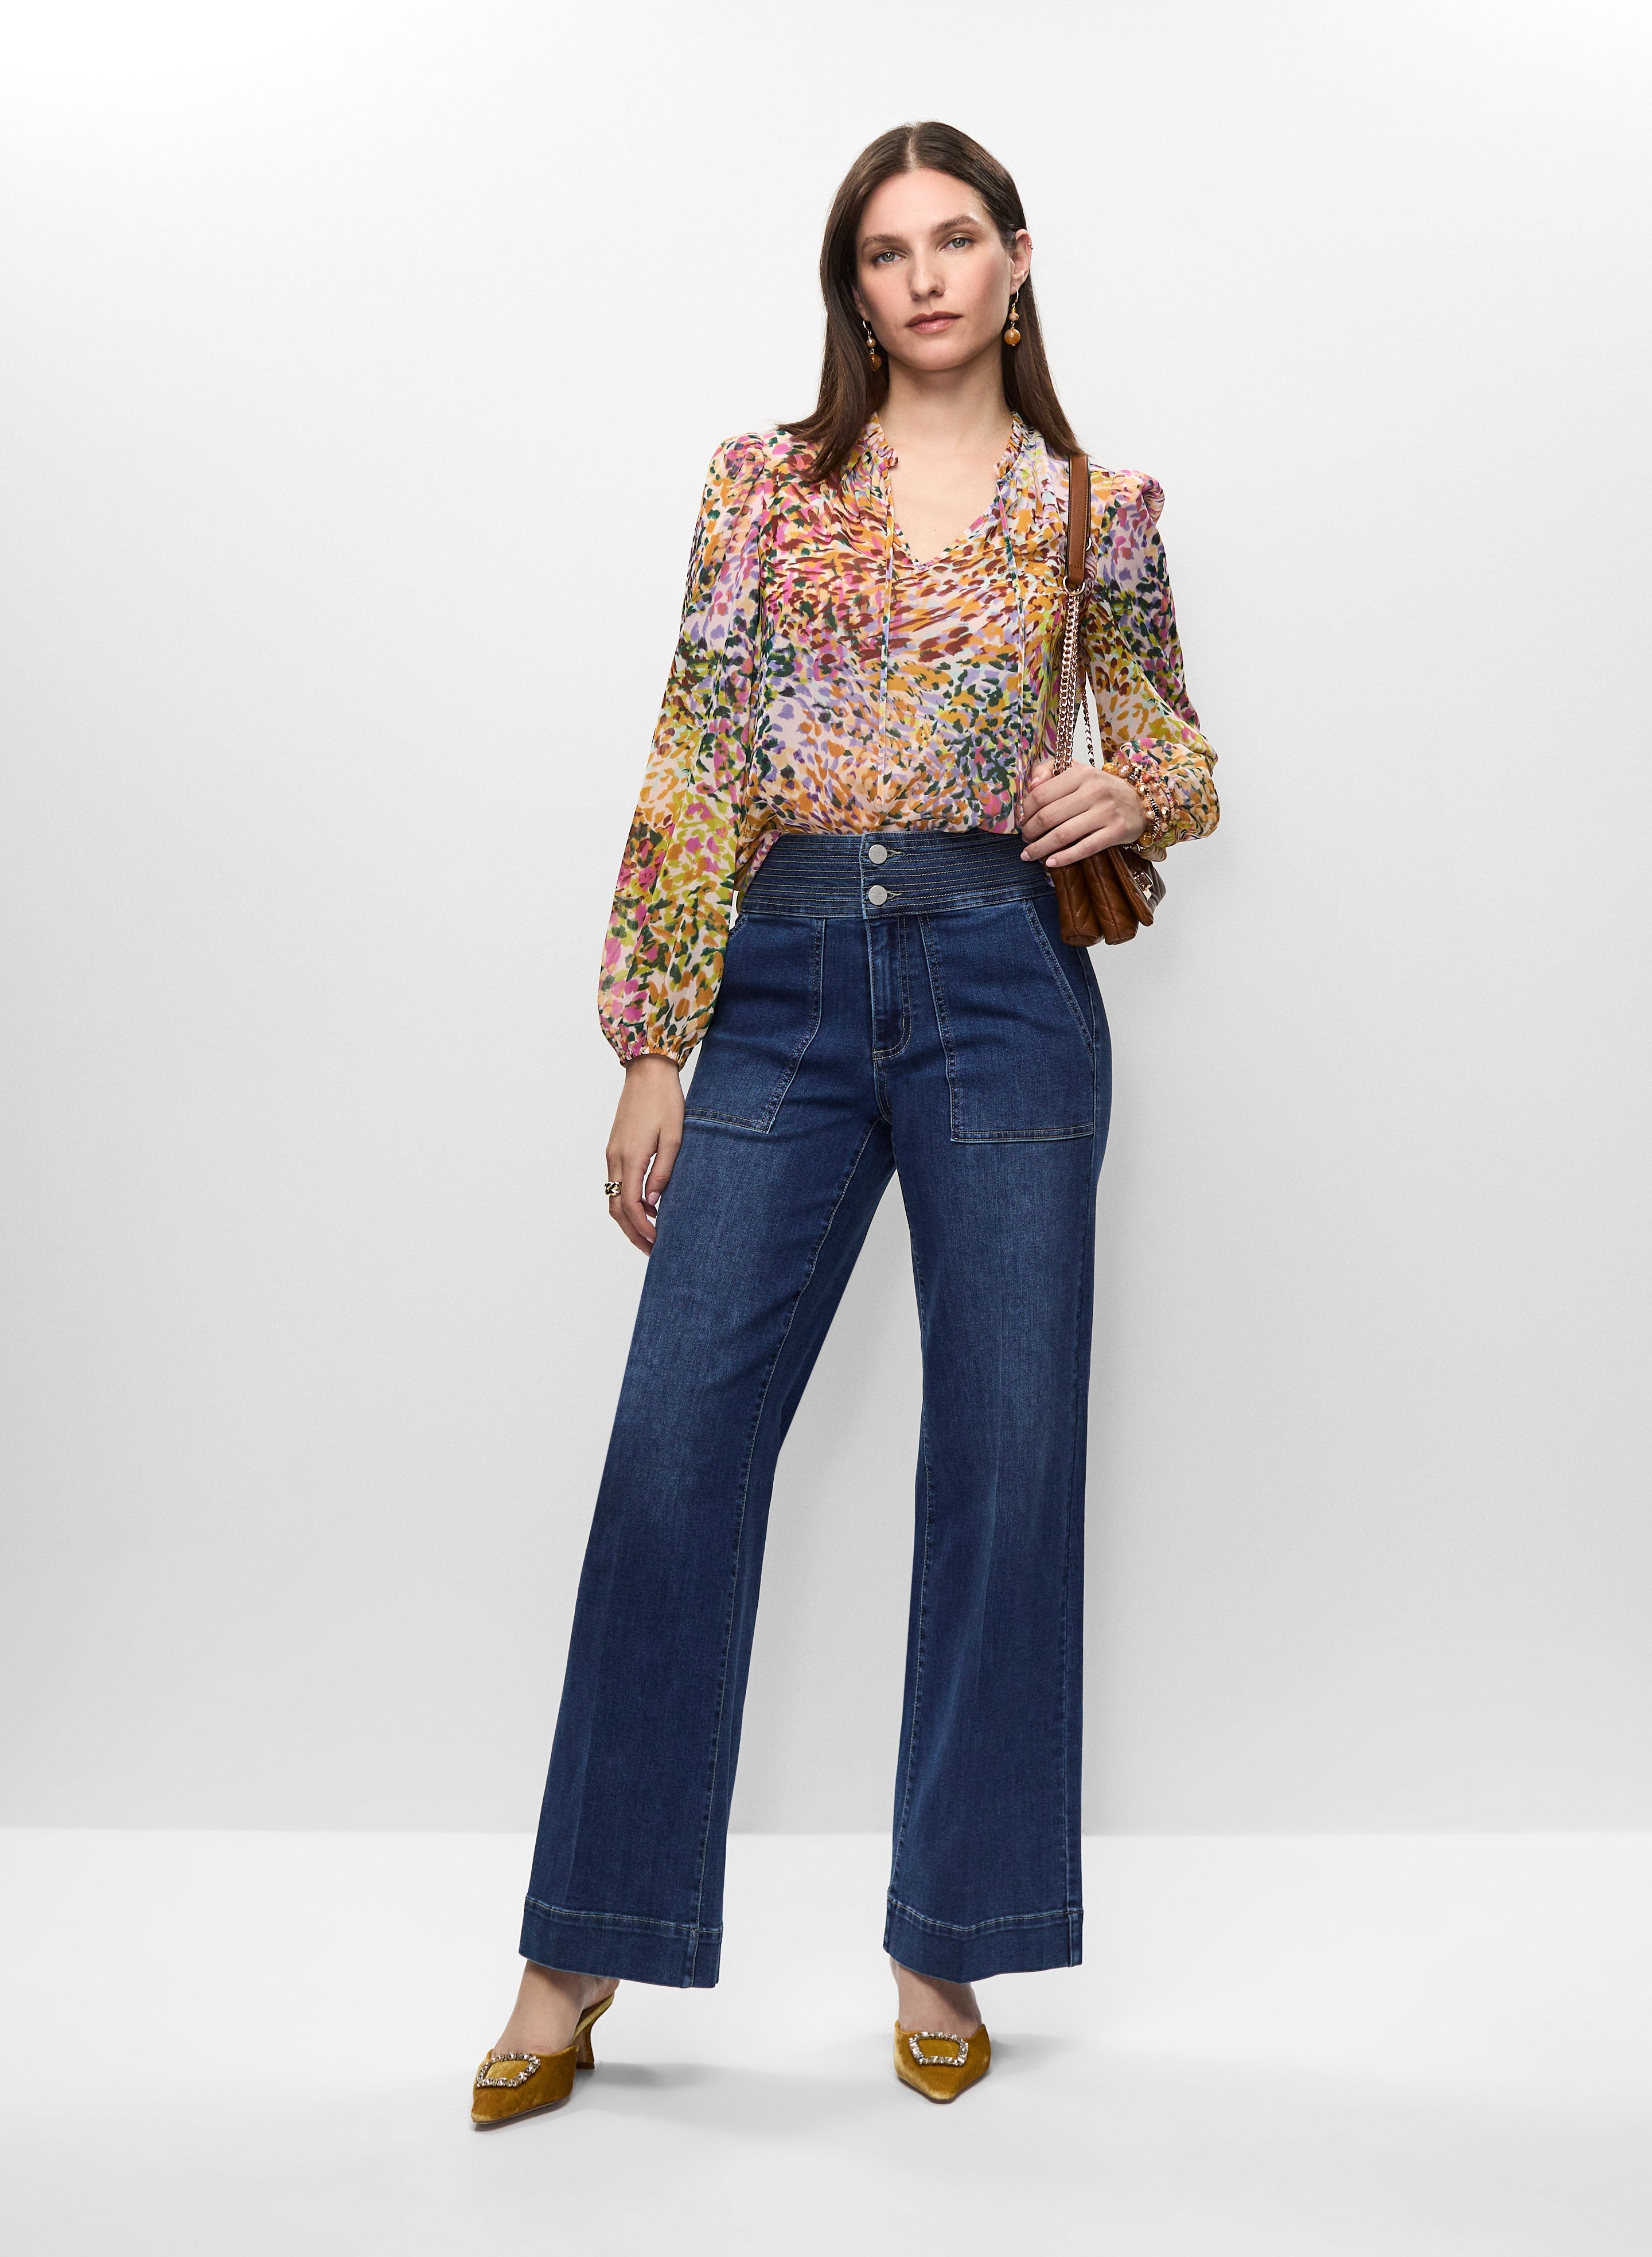 Abstract Print Blouse & Trouser Jeans